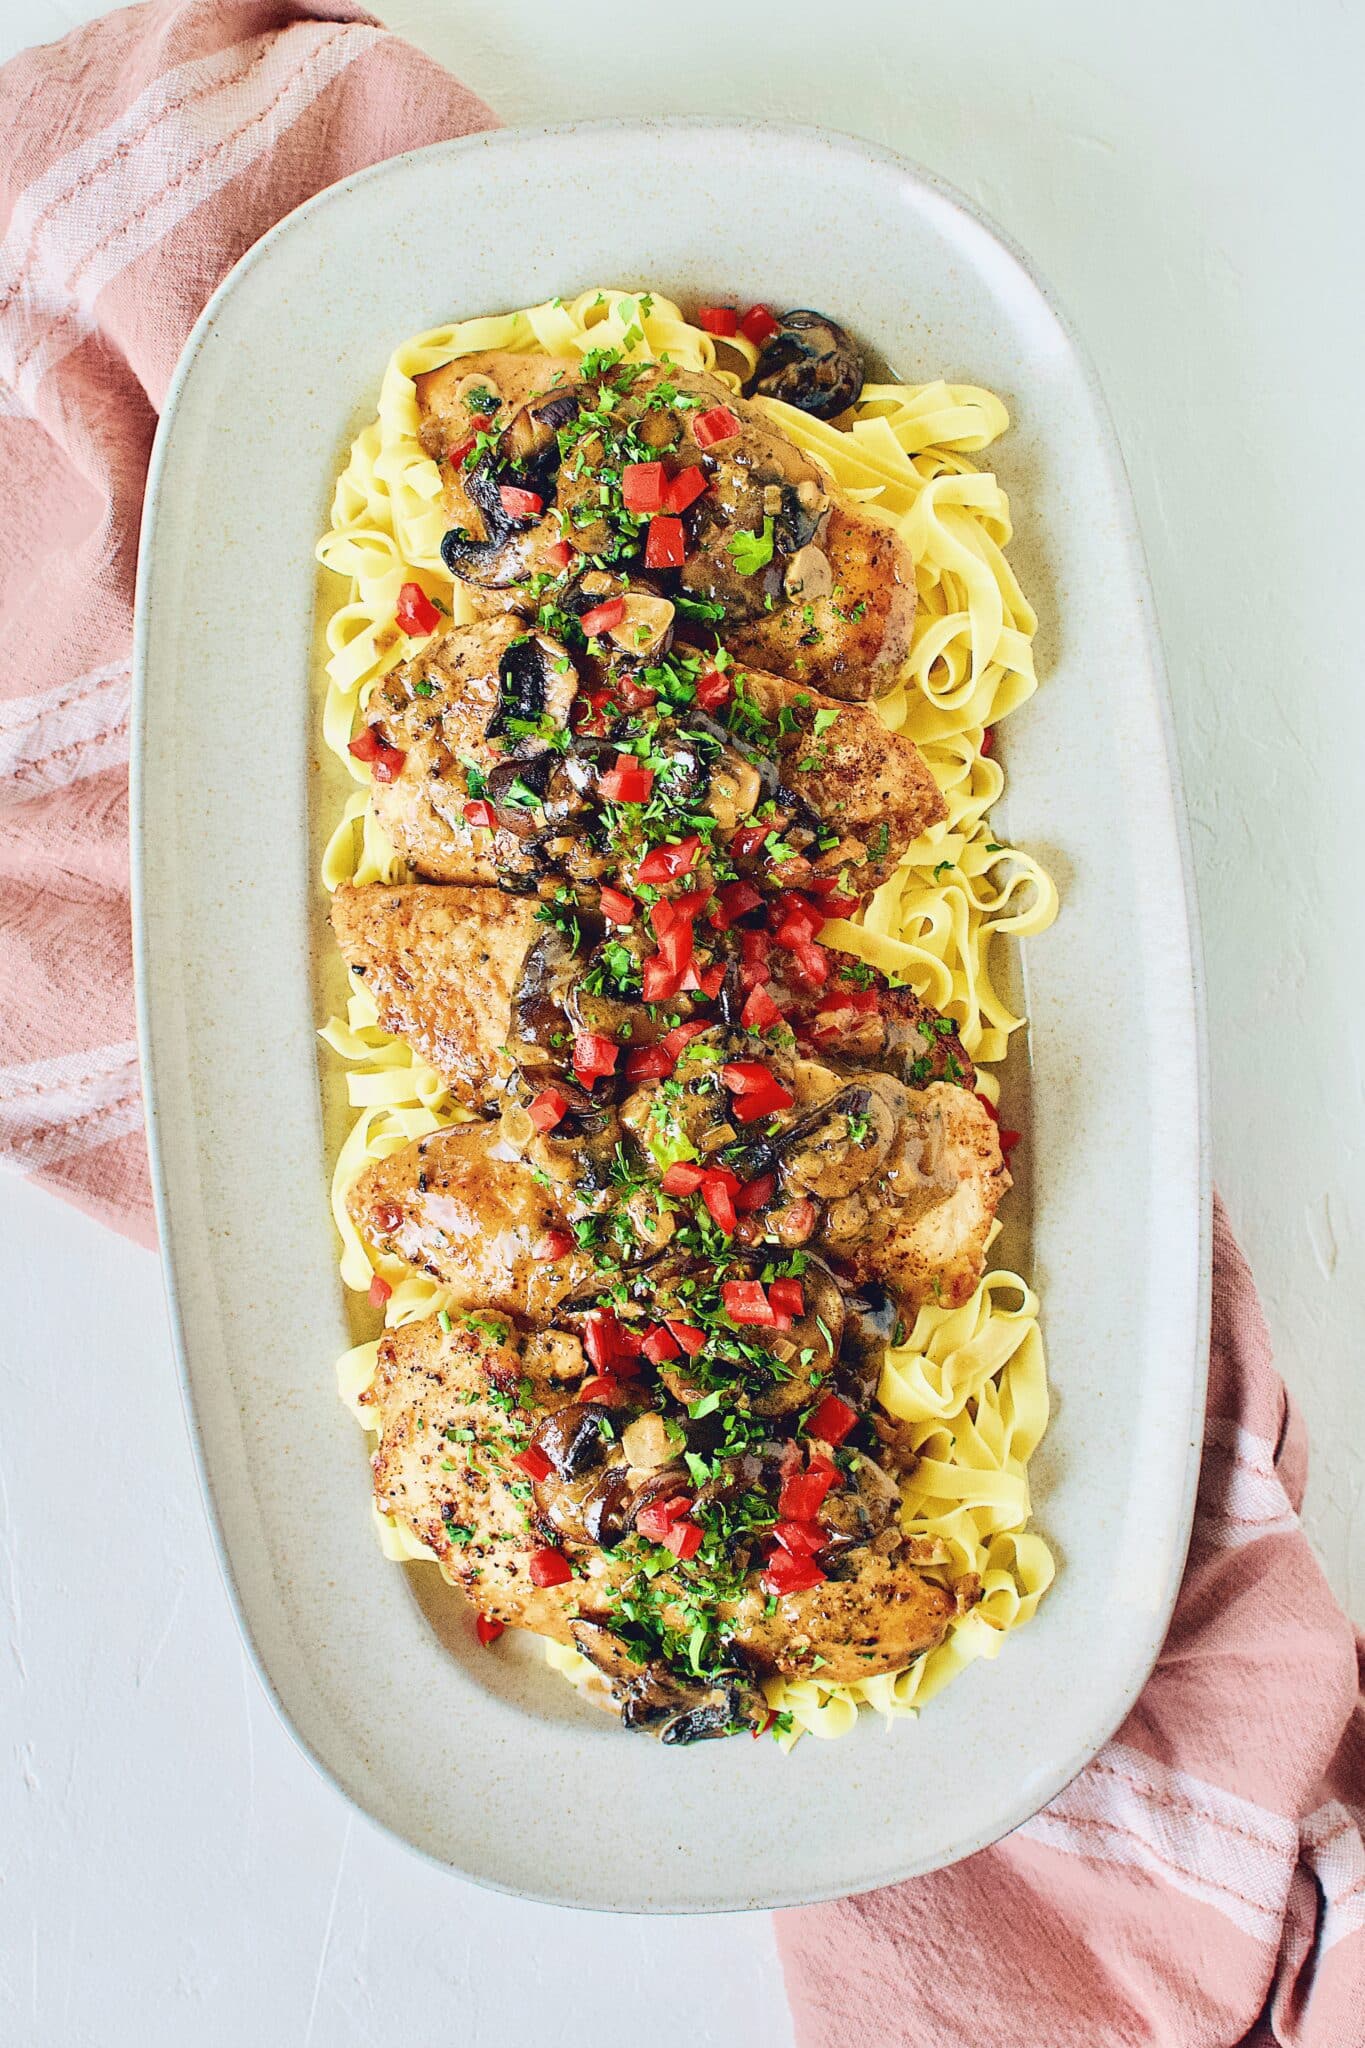 Creamy Chicken and Mushrooms served on a bed of fresh homemade pasta.